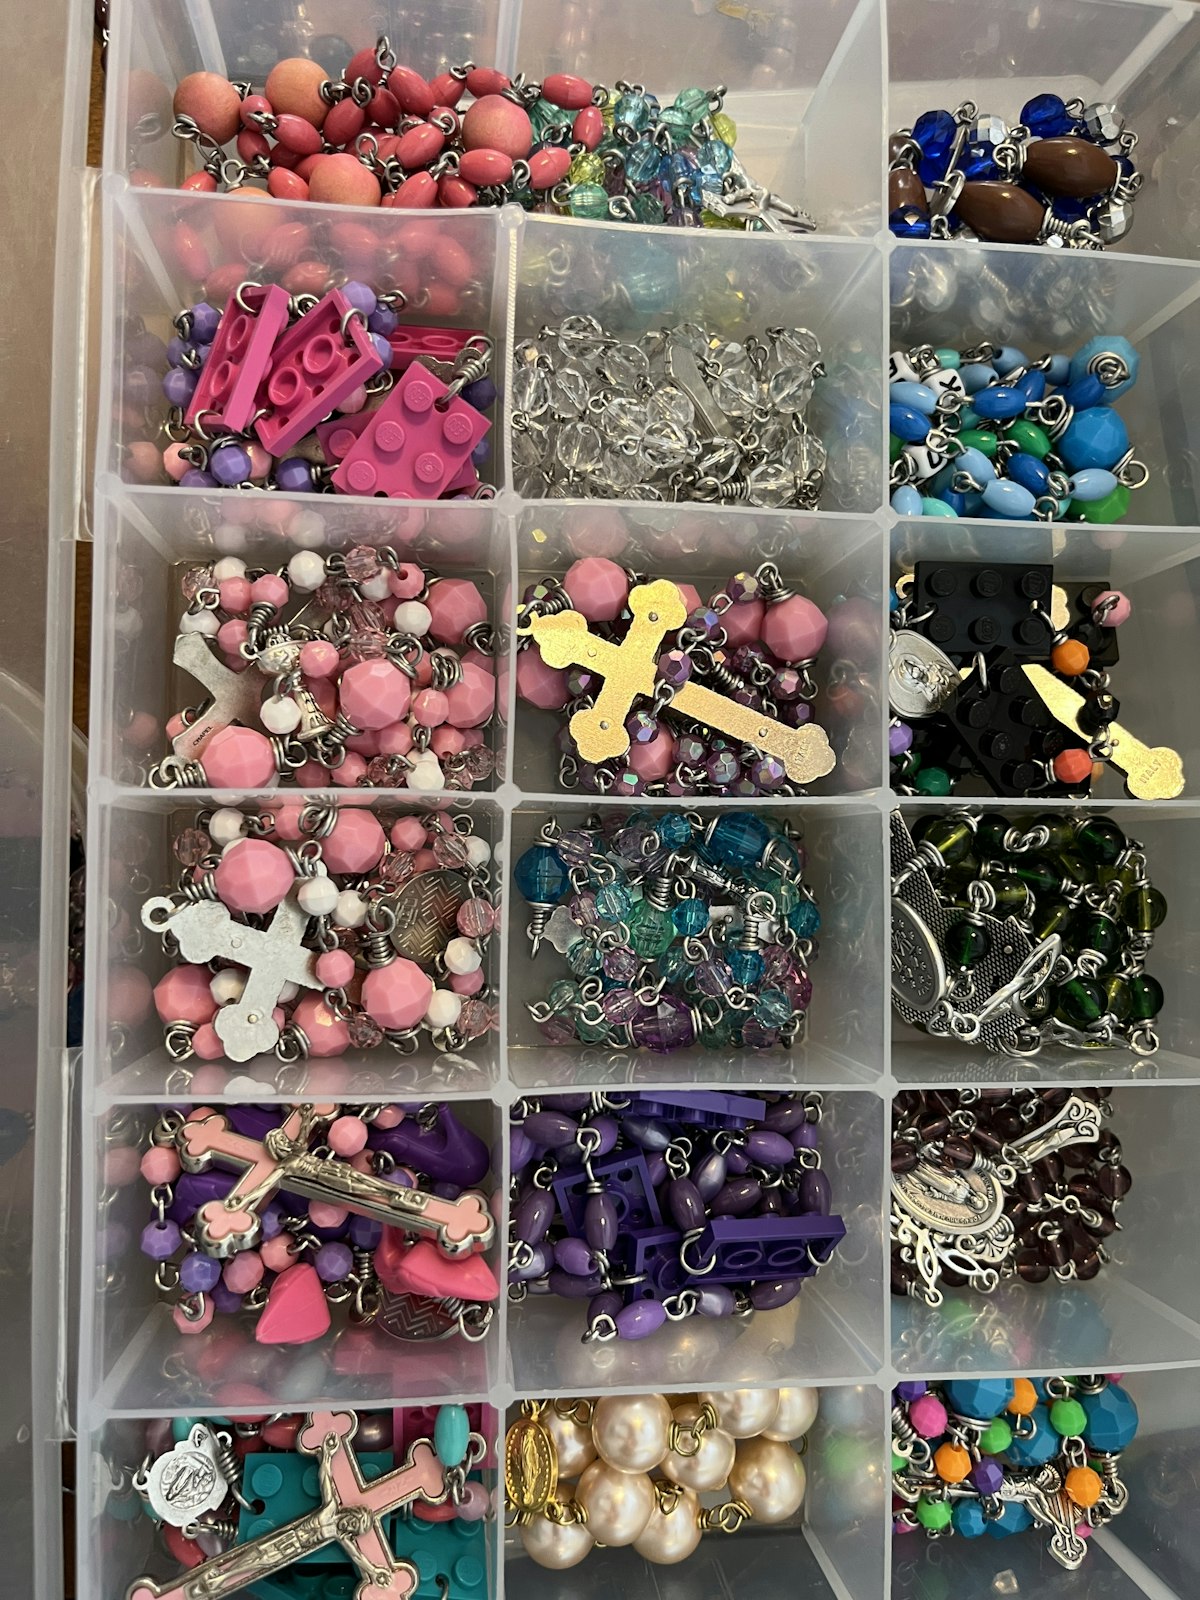 Over the years, Weber estimates she has designed "thousands" of rosaries. “To think of all the rosaries across the world I’ve made that are being prayed with every day is really an honor,” Weber said.